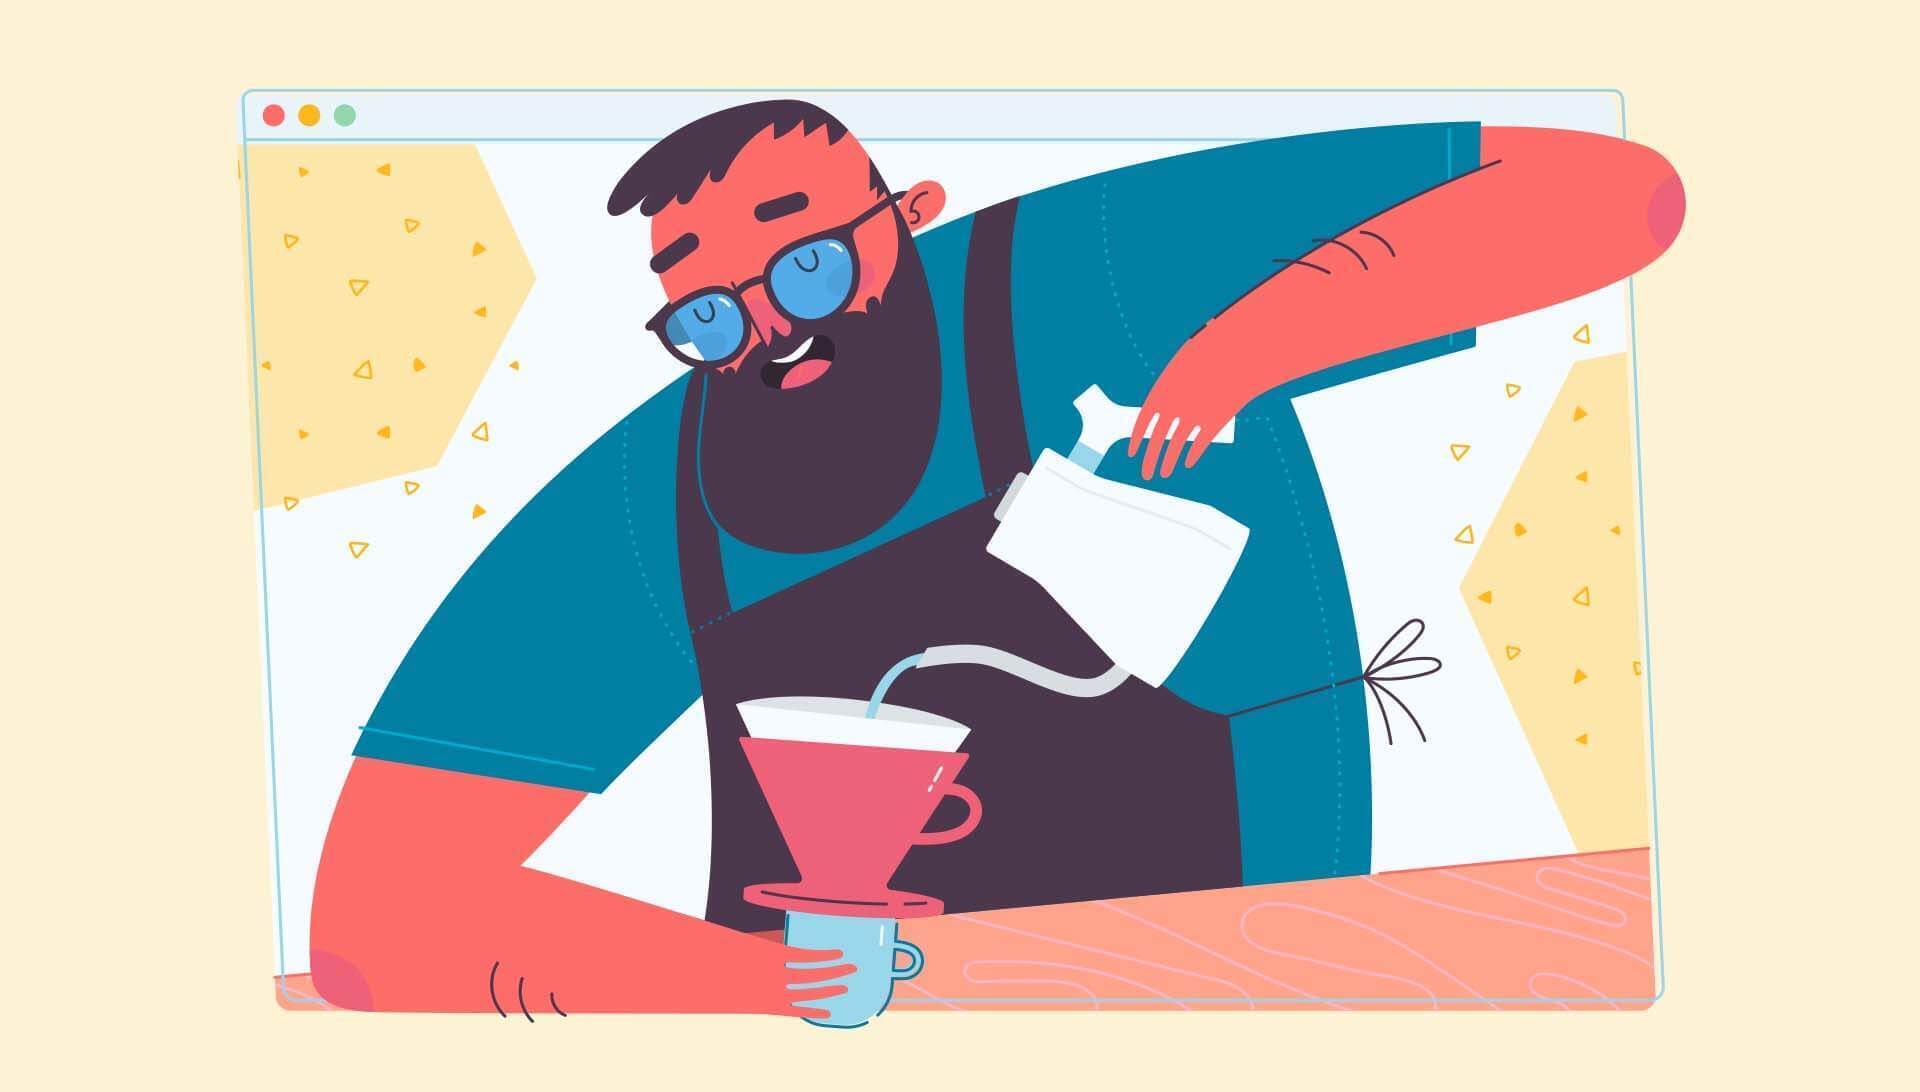 An illustration of Joel wearing black apron and making a coffee with a filter.